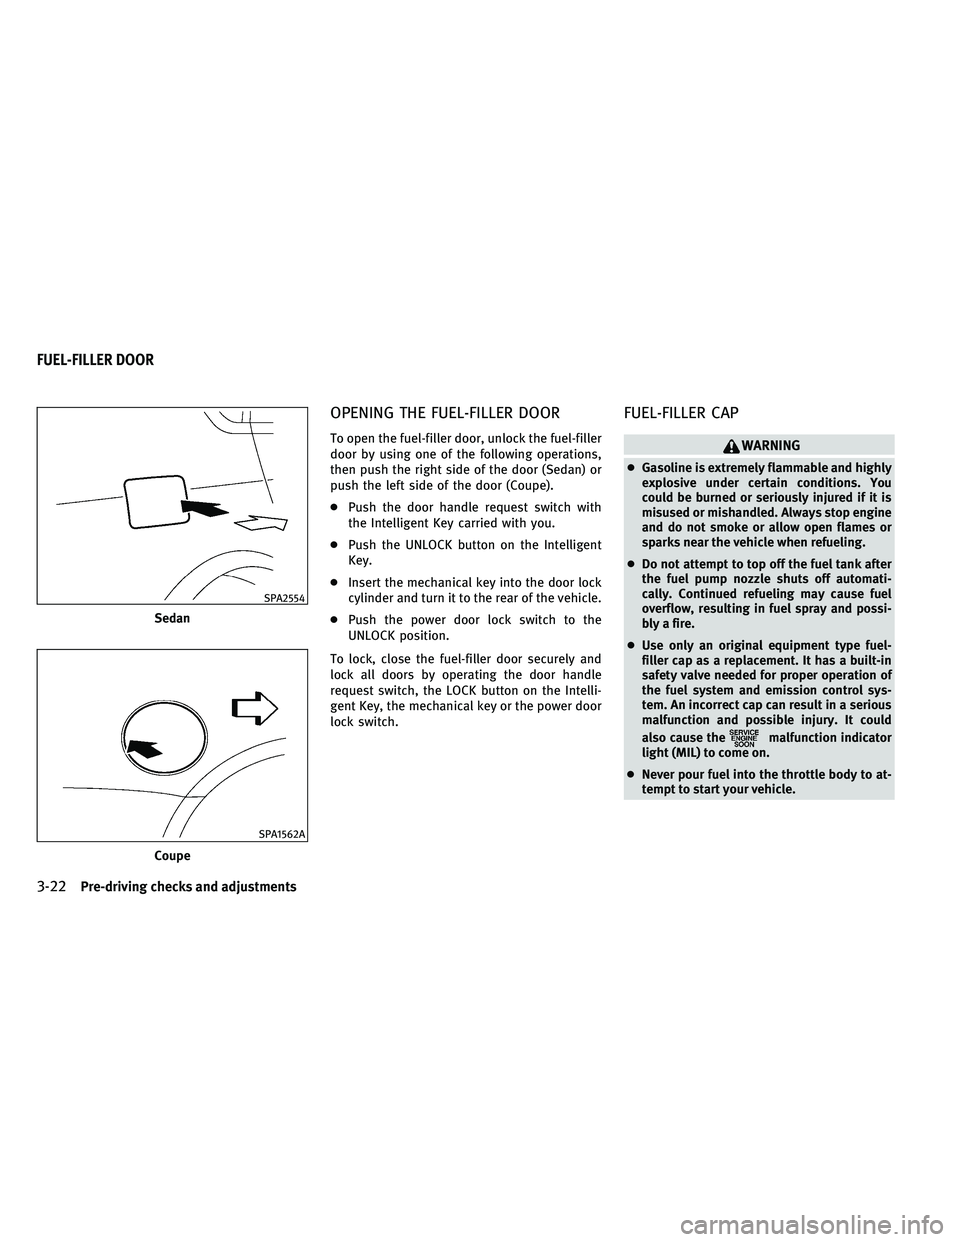 INFINITI G-COUPE 2011  Owners Manual OPENING THE FUEL-FILLER DOOR
To open the fuel-filler door, unlock the fuel-filler
door by using one of the following operations,
then push the right side of the door (Sedan) or
push the left side of t